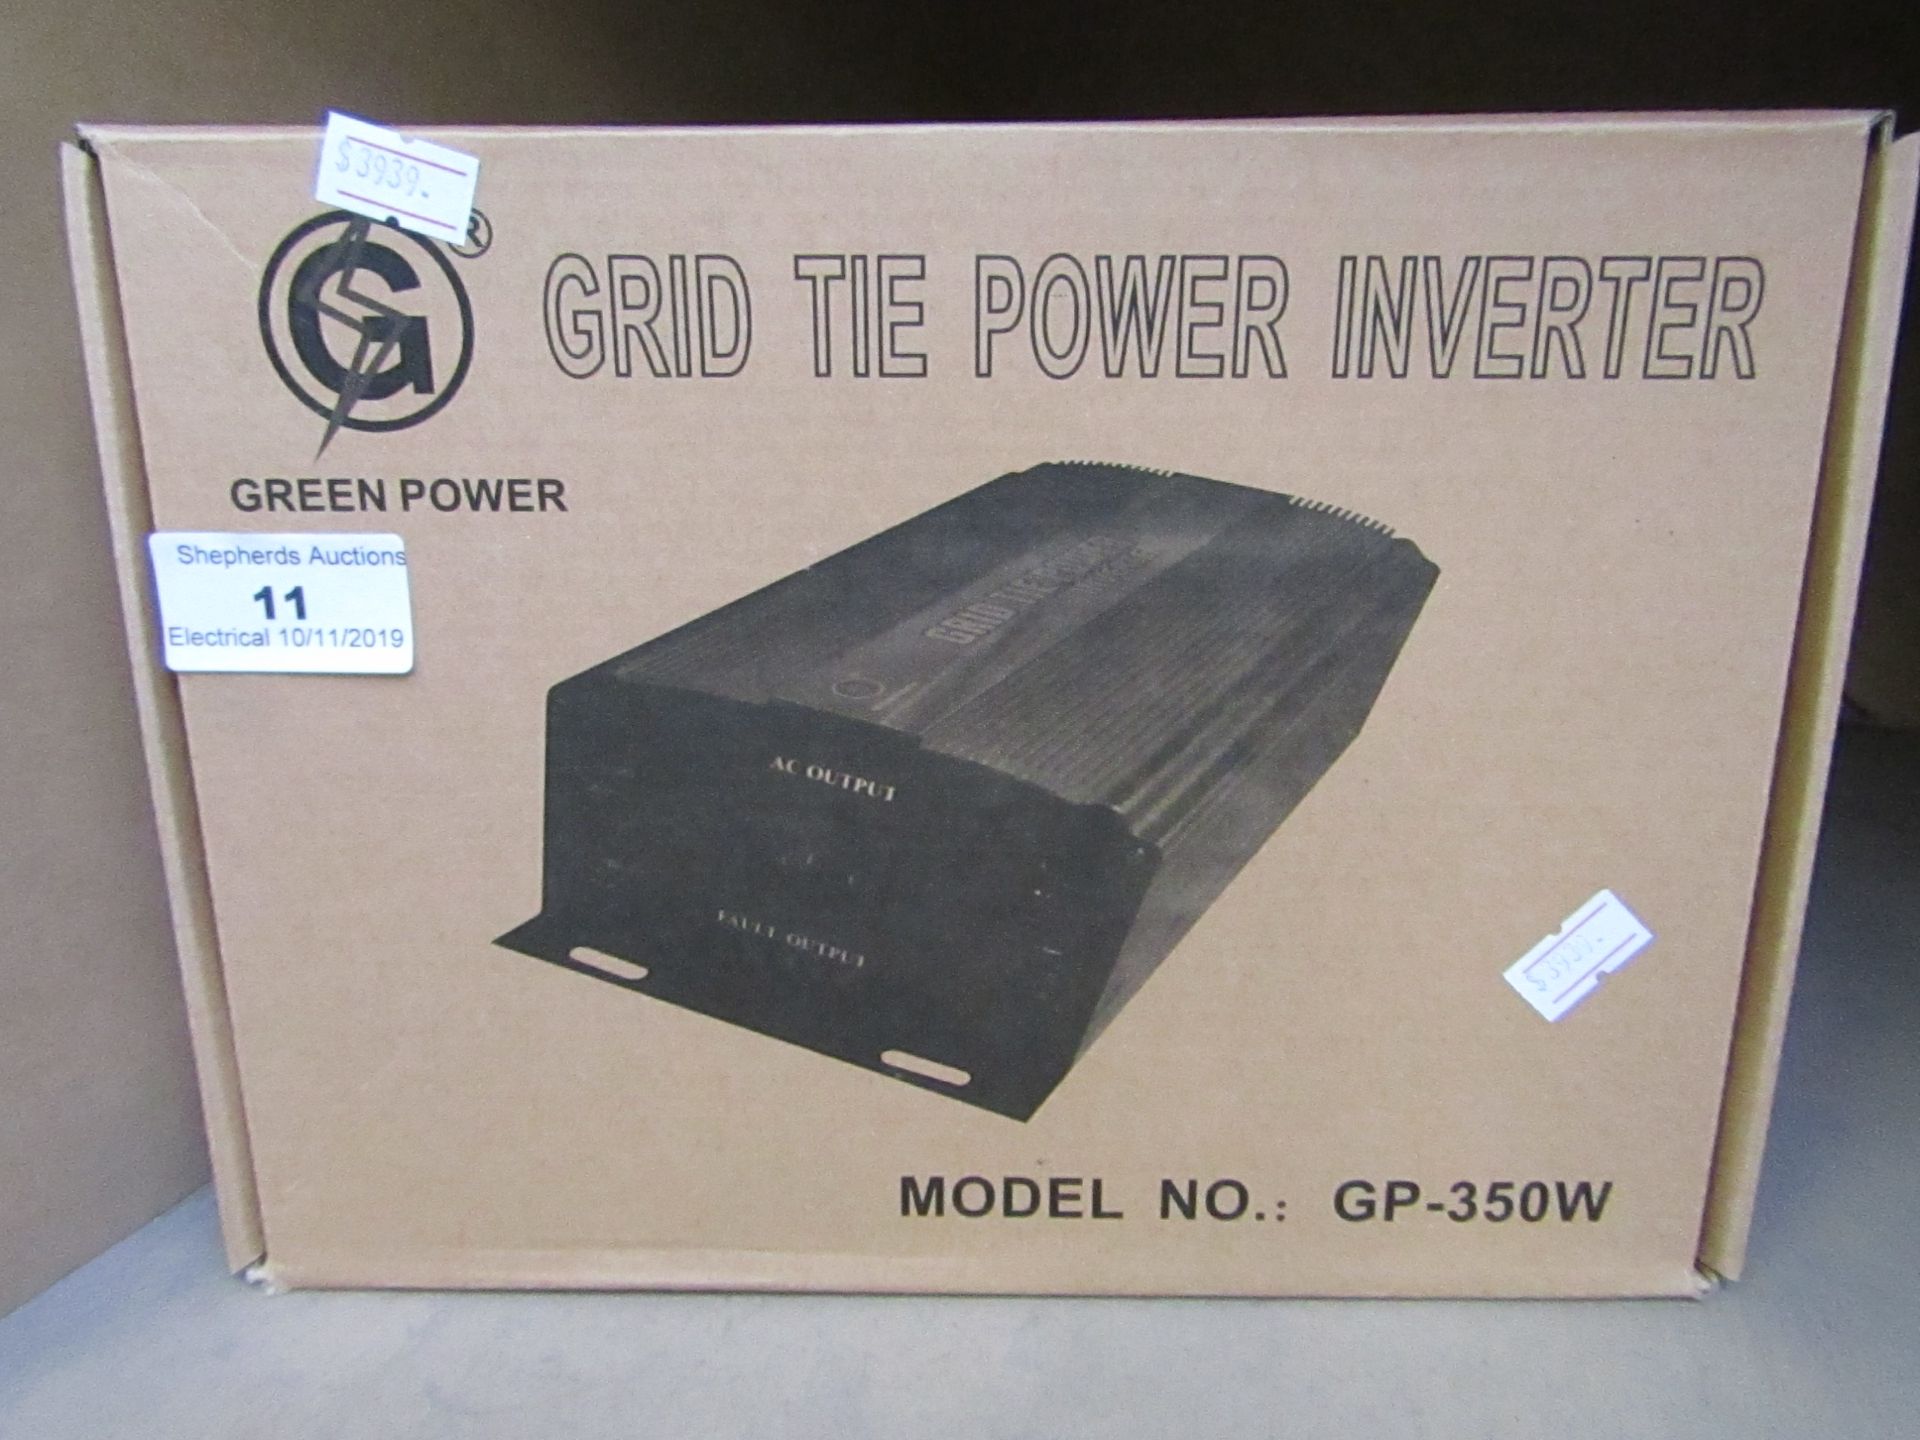 Green power - Grid tie power inverter, untested and boxed.